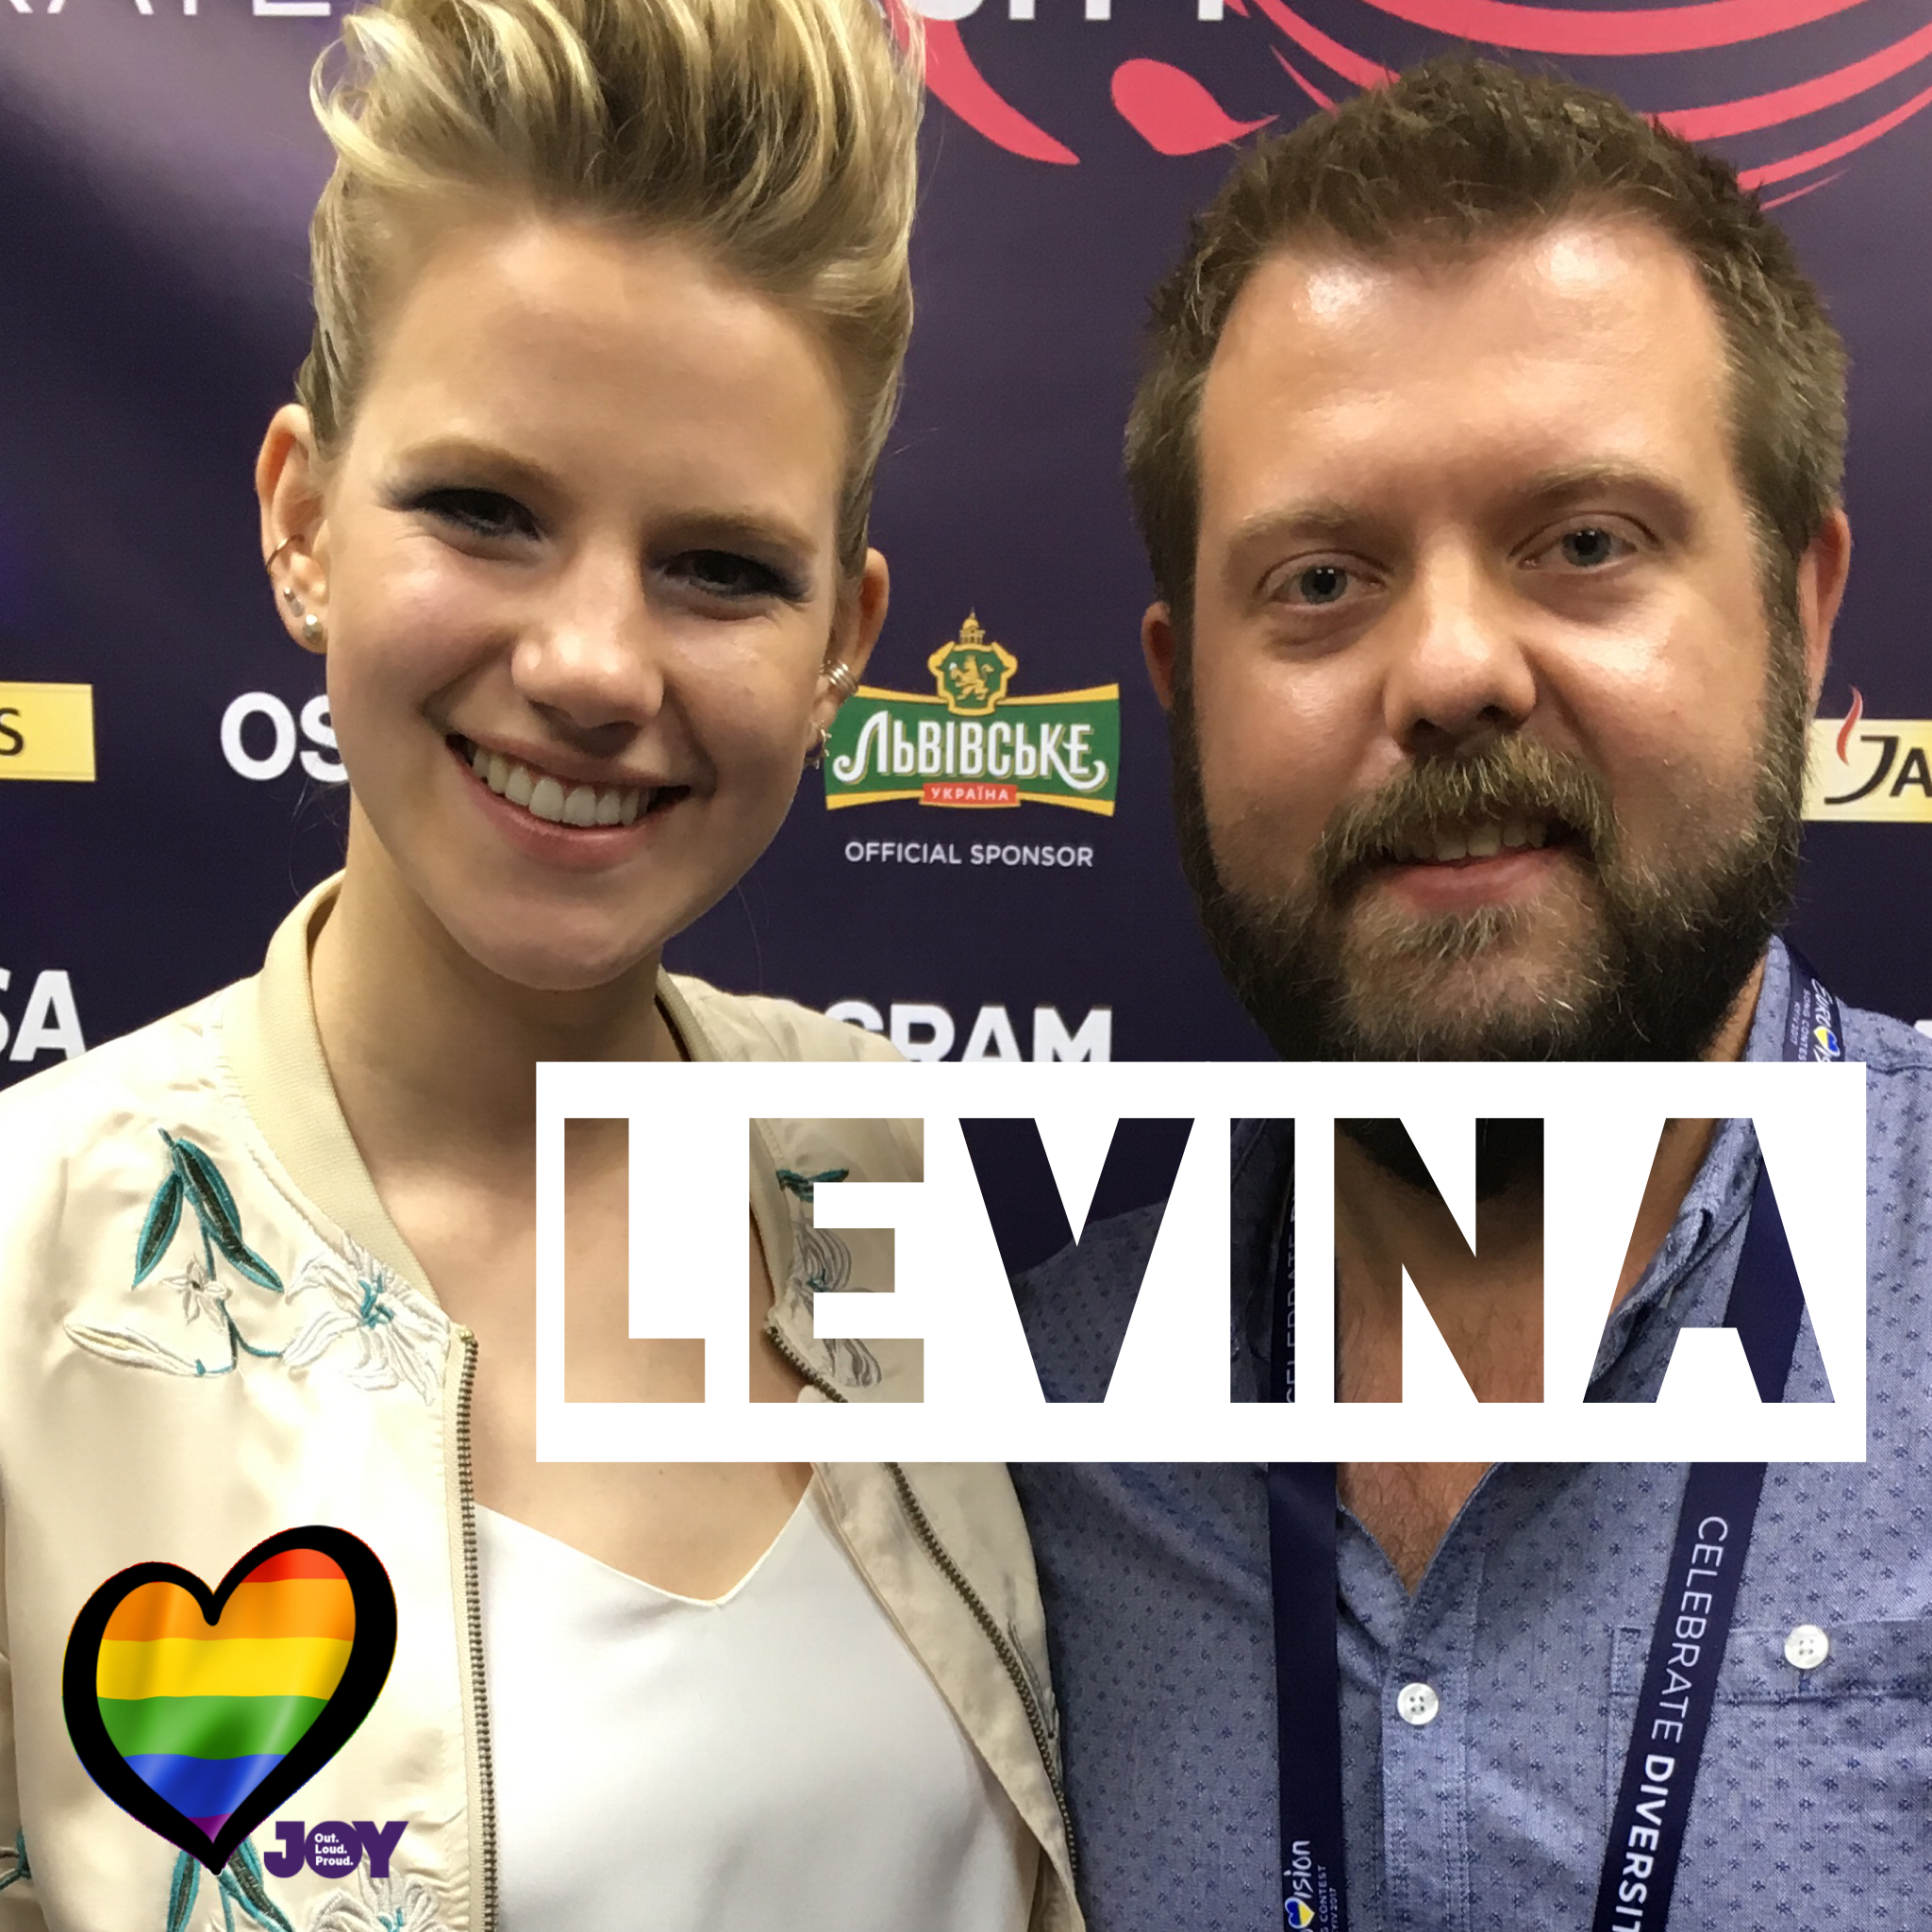 Germany: Will It Be A Perfect Life For Levina?